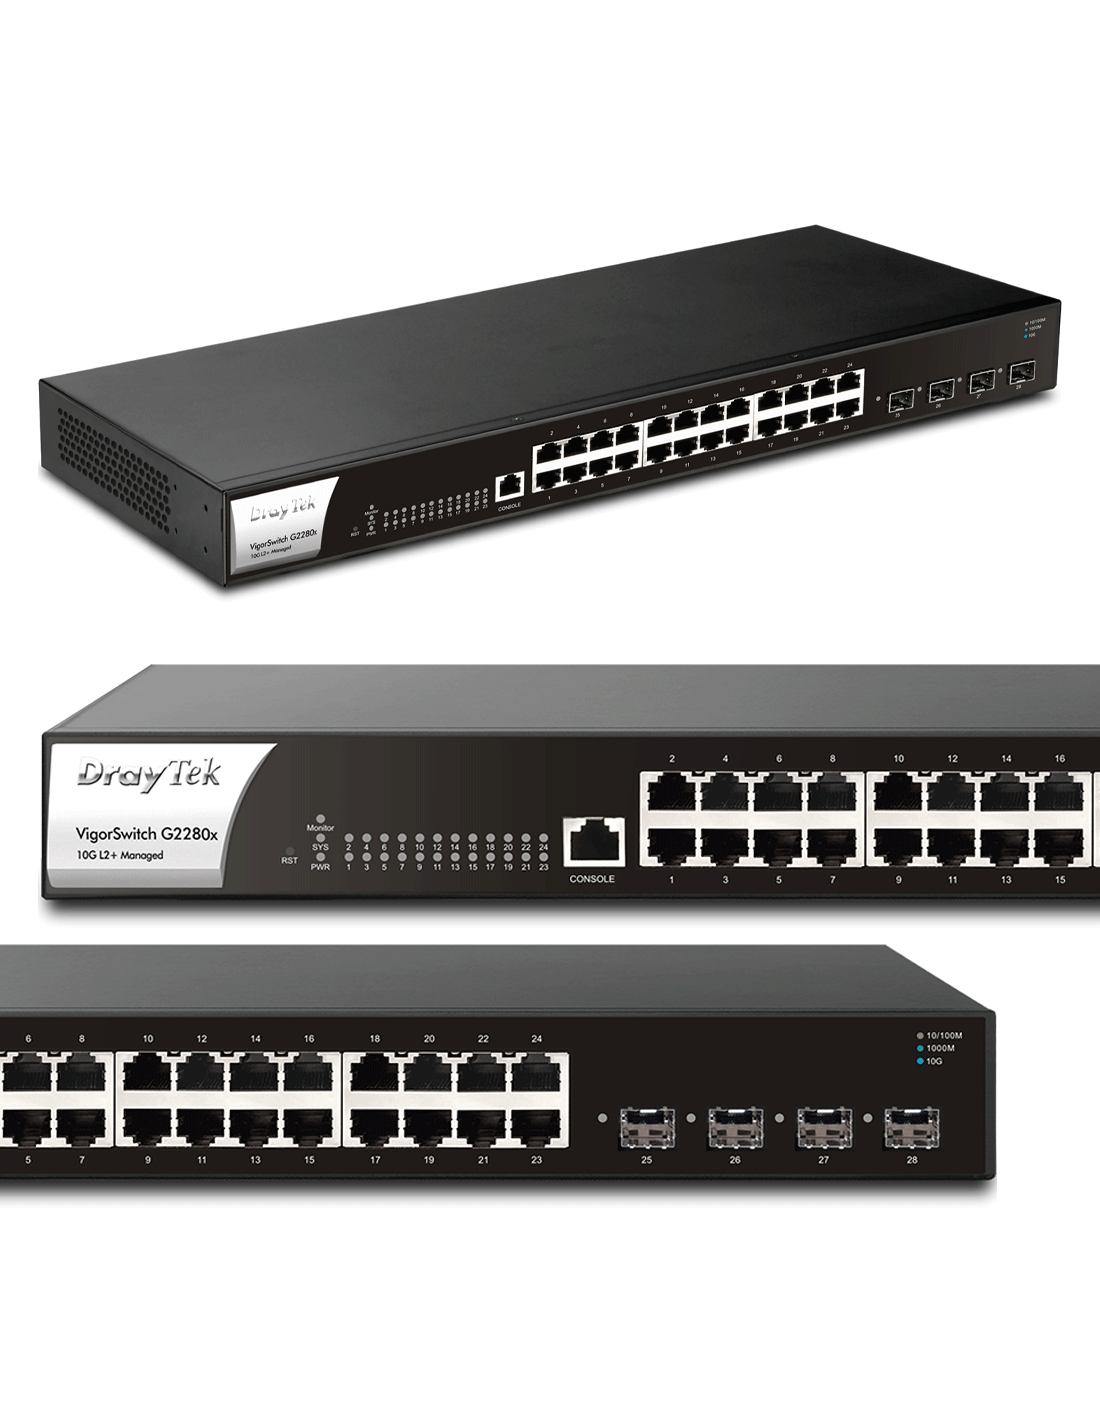 Switch PoE manageable L2+ 10G, , rack 24 ports 10/100/1000Mbps, 4 combo  UTP/SFP